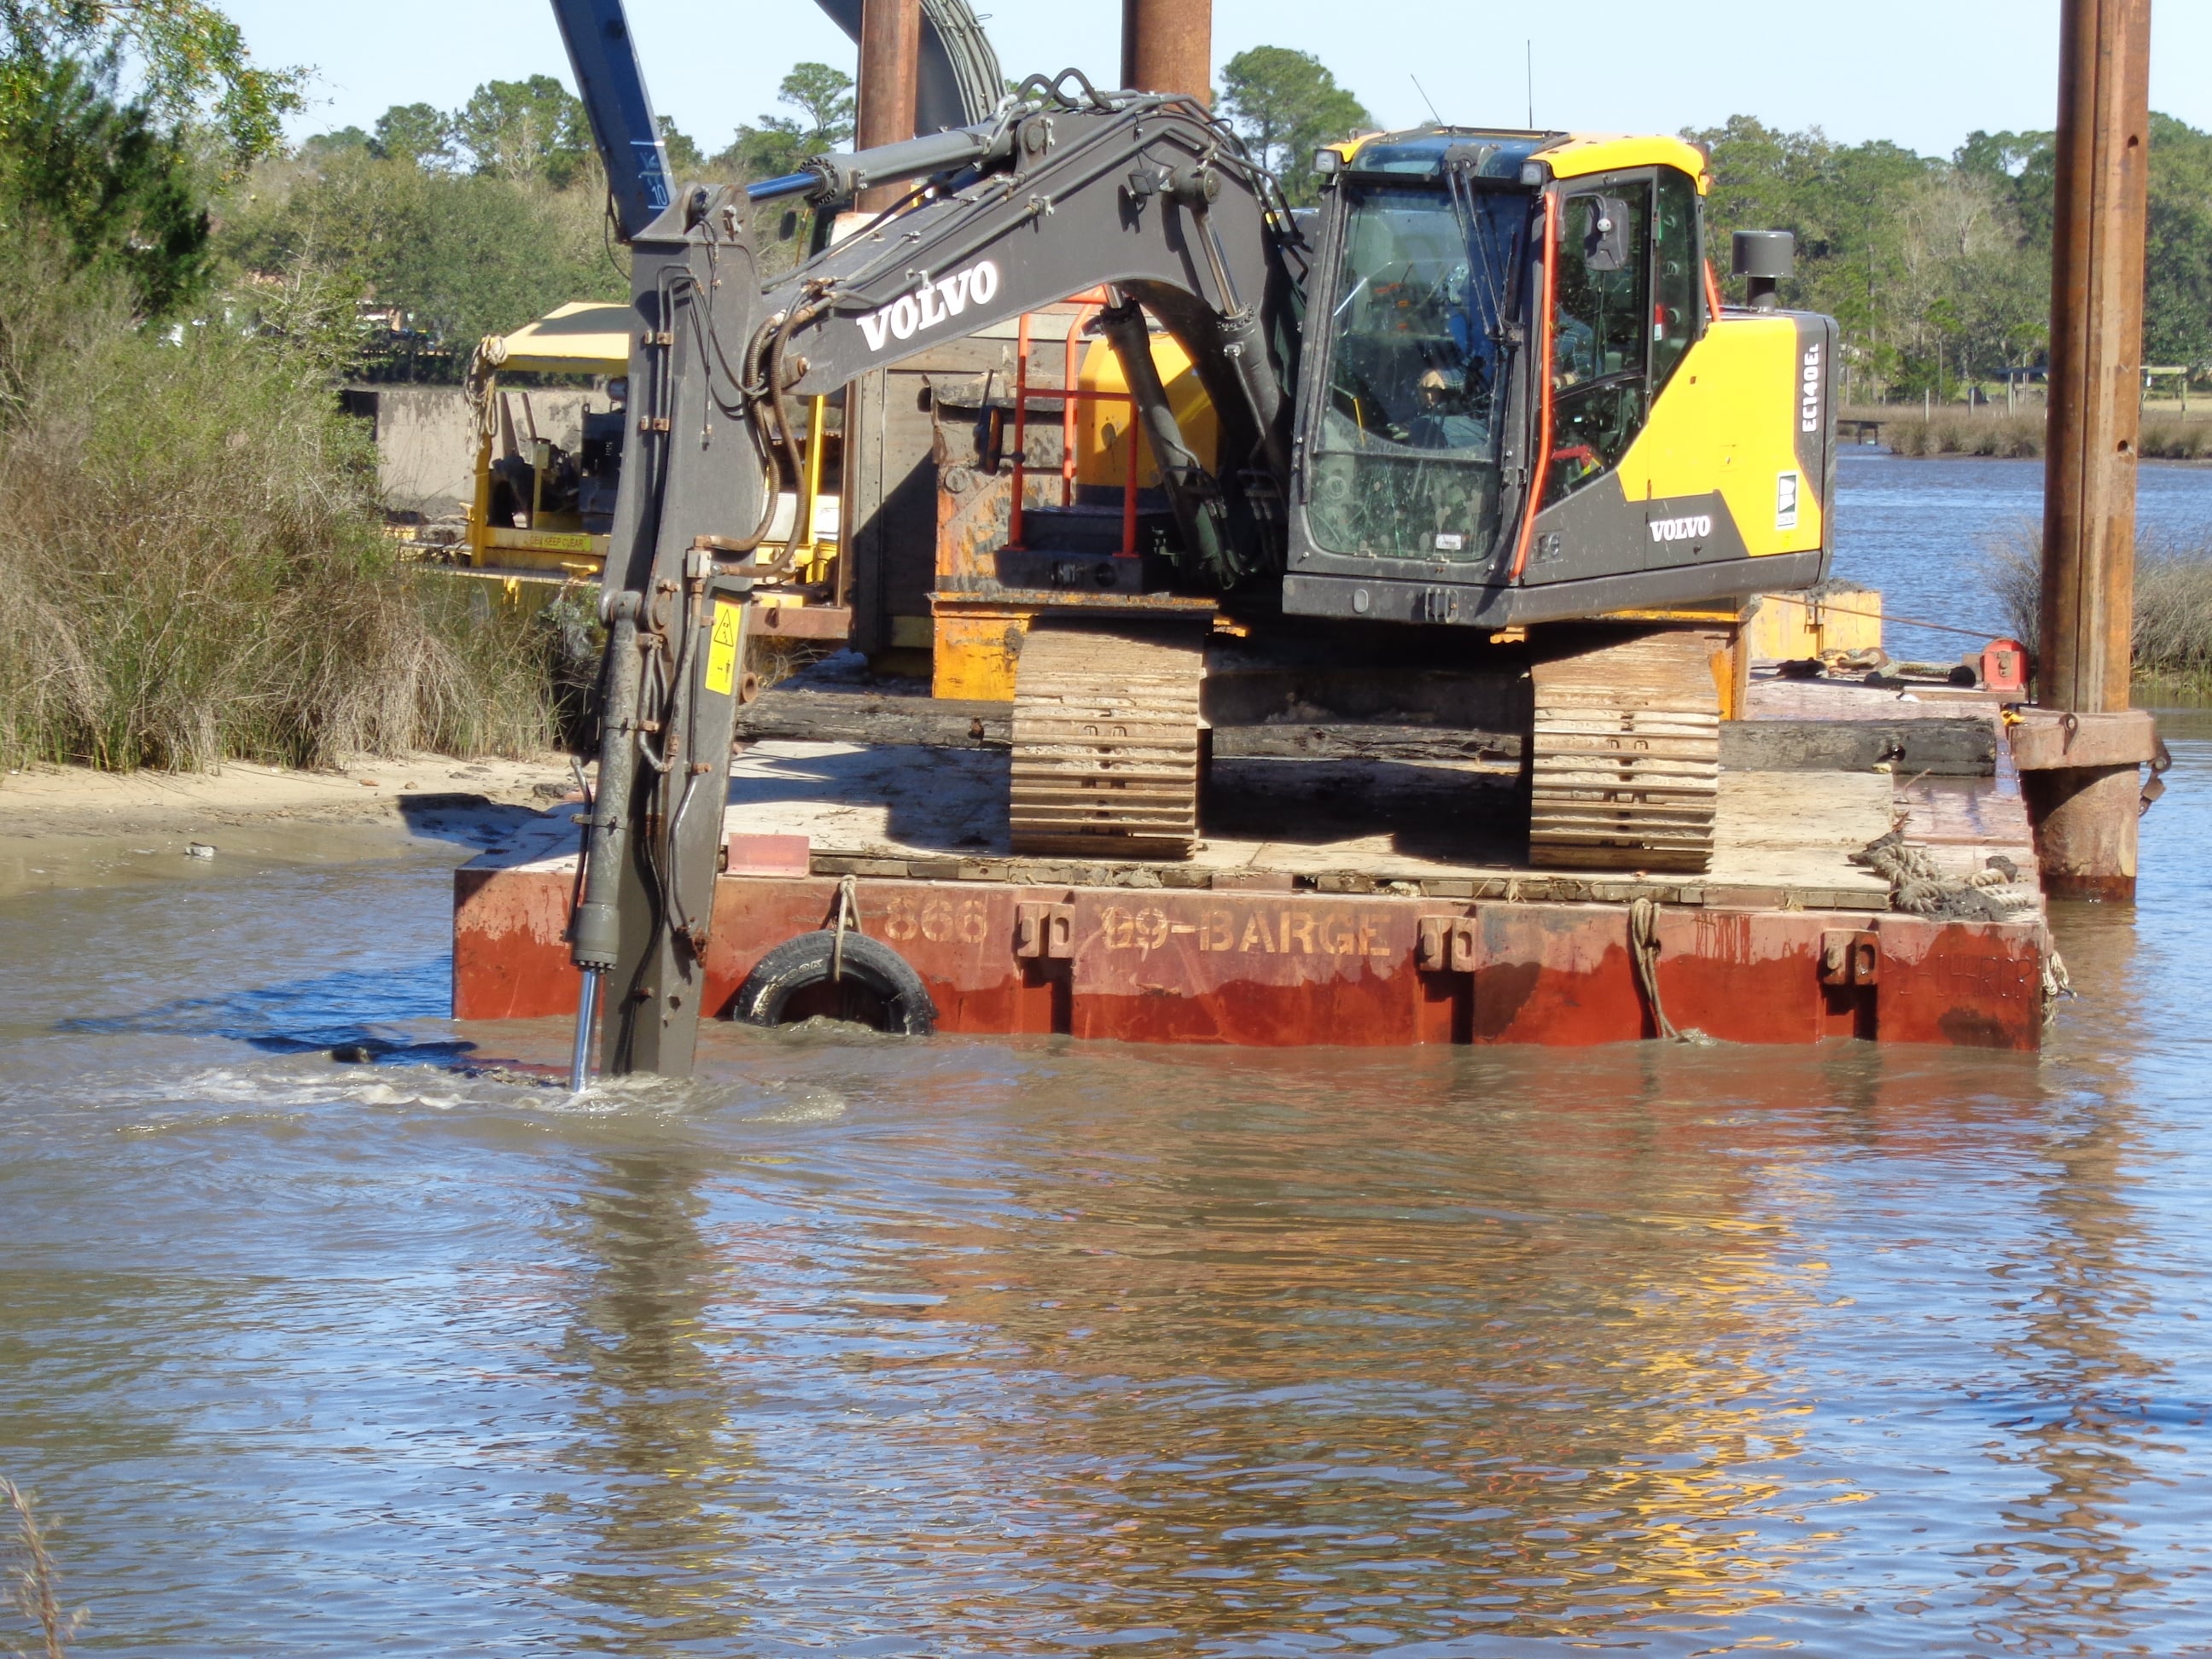 dredging streambeds may be an effective technique for mining